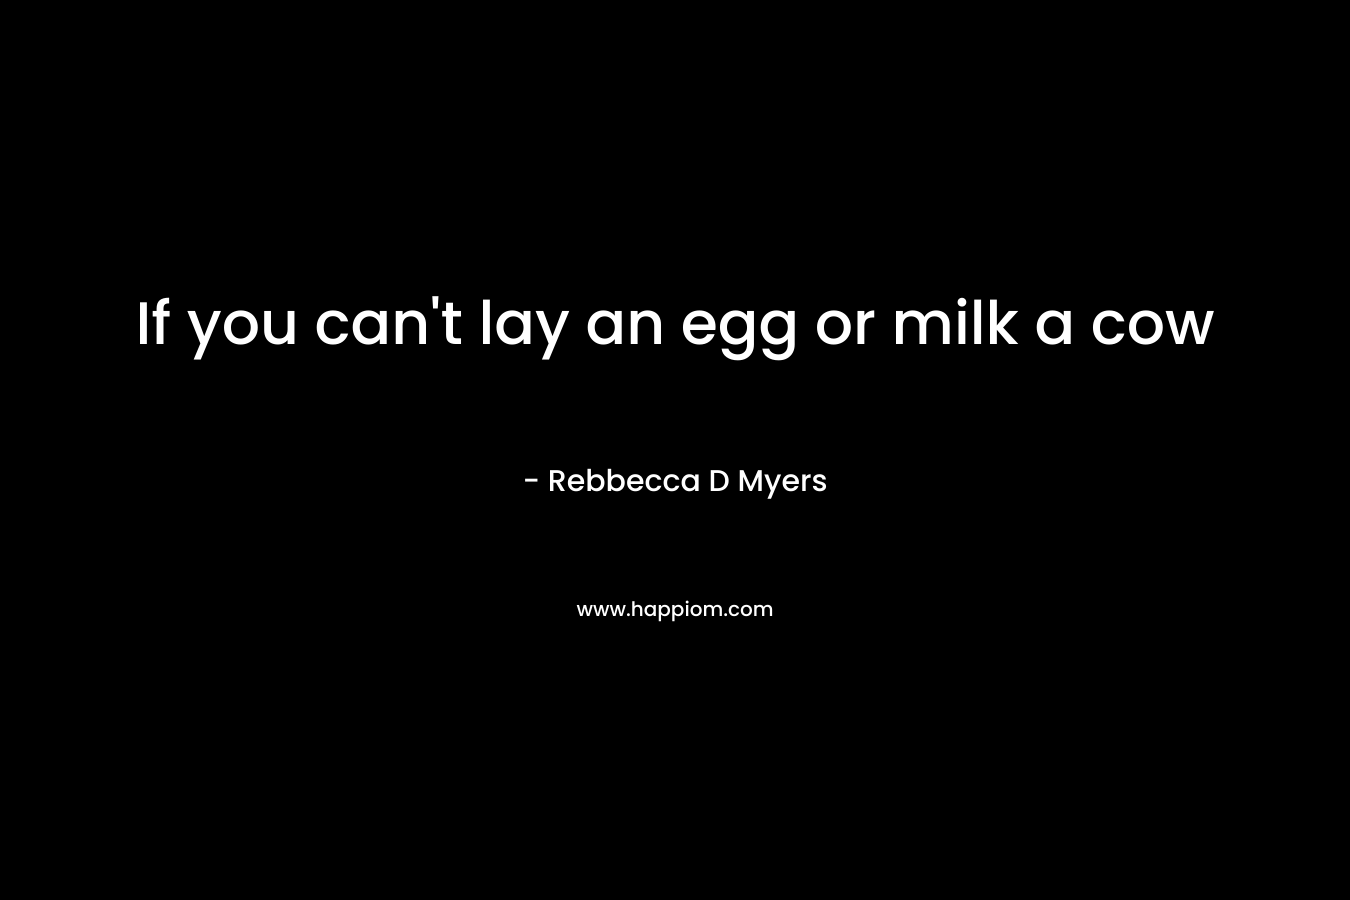 If you can't lay an egg or milk a cow